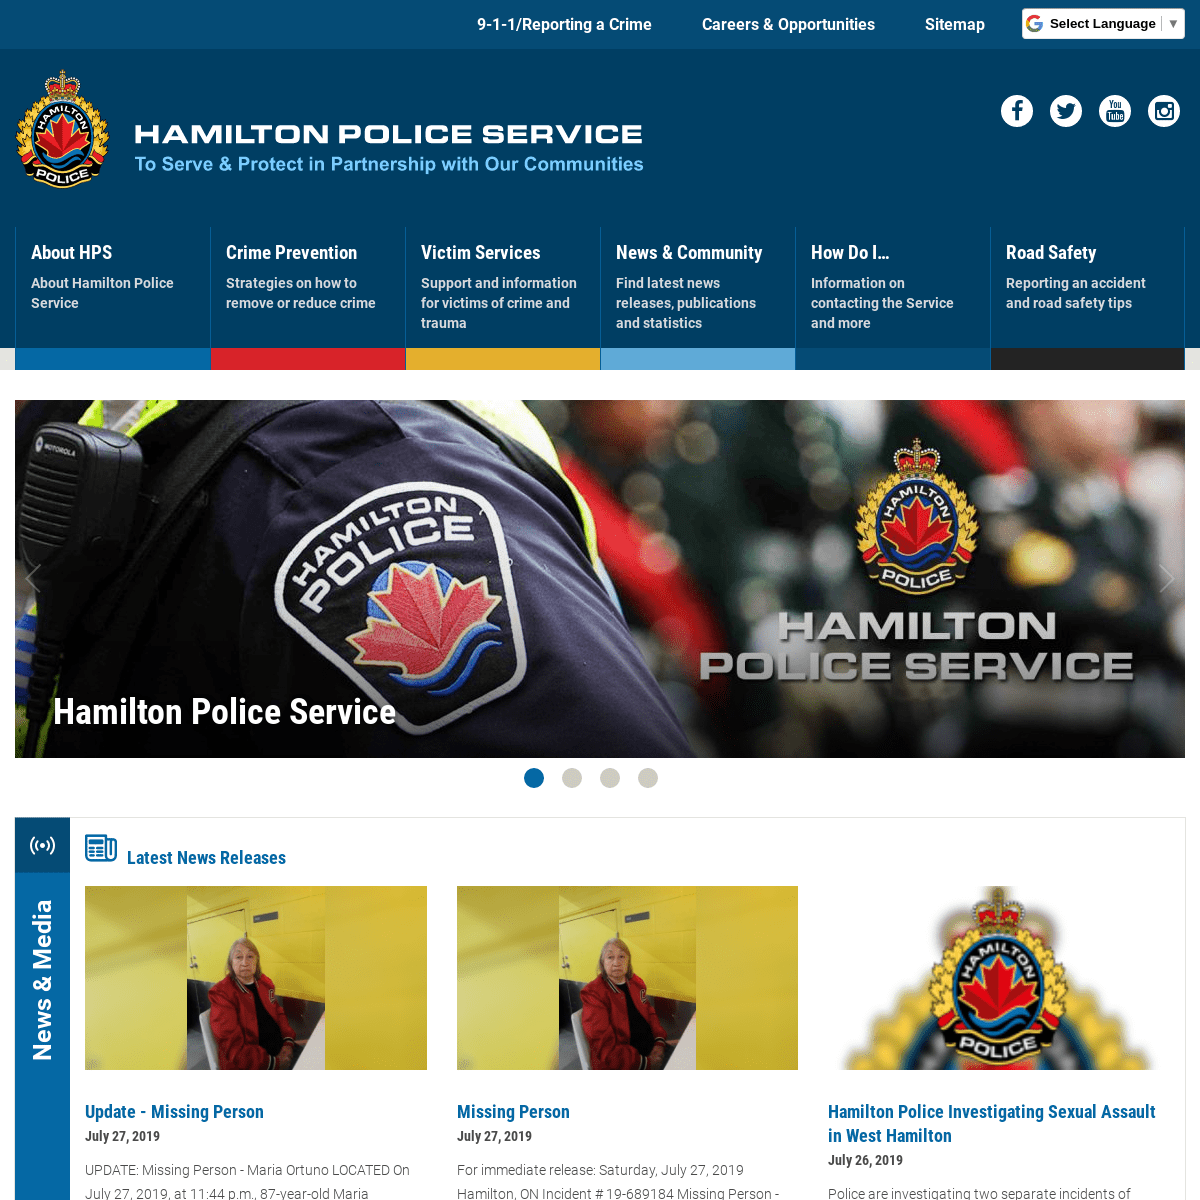 Hamilton Police Service | To Serve & Protect in Partnership with Our Communities